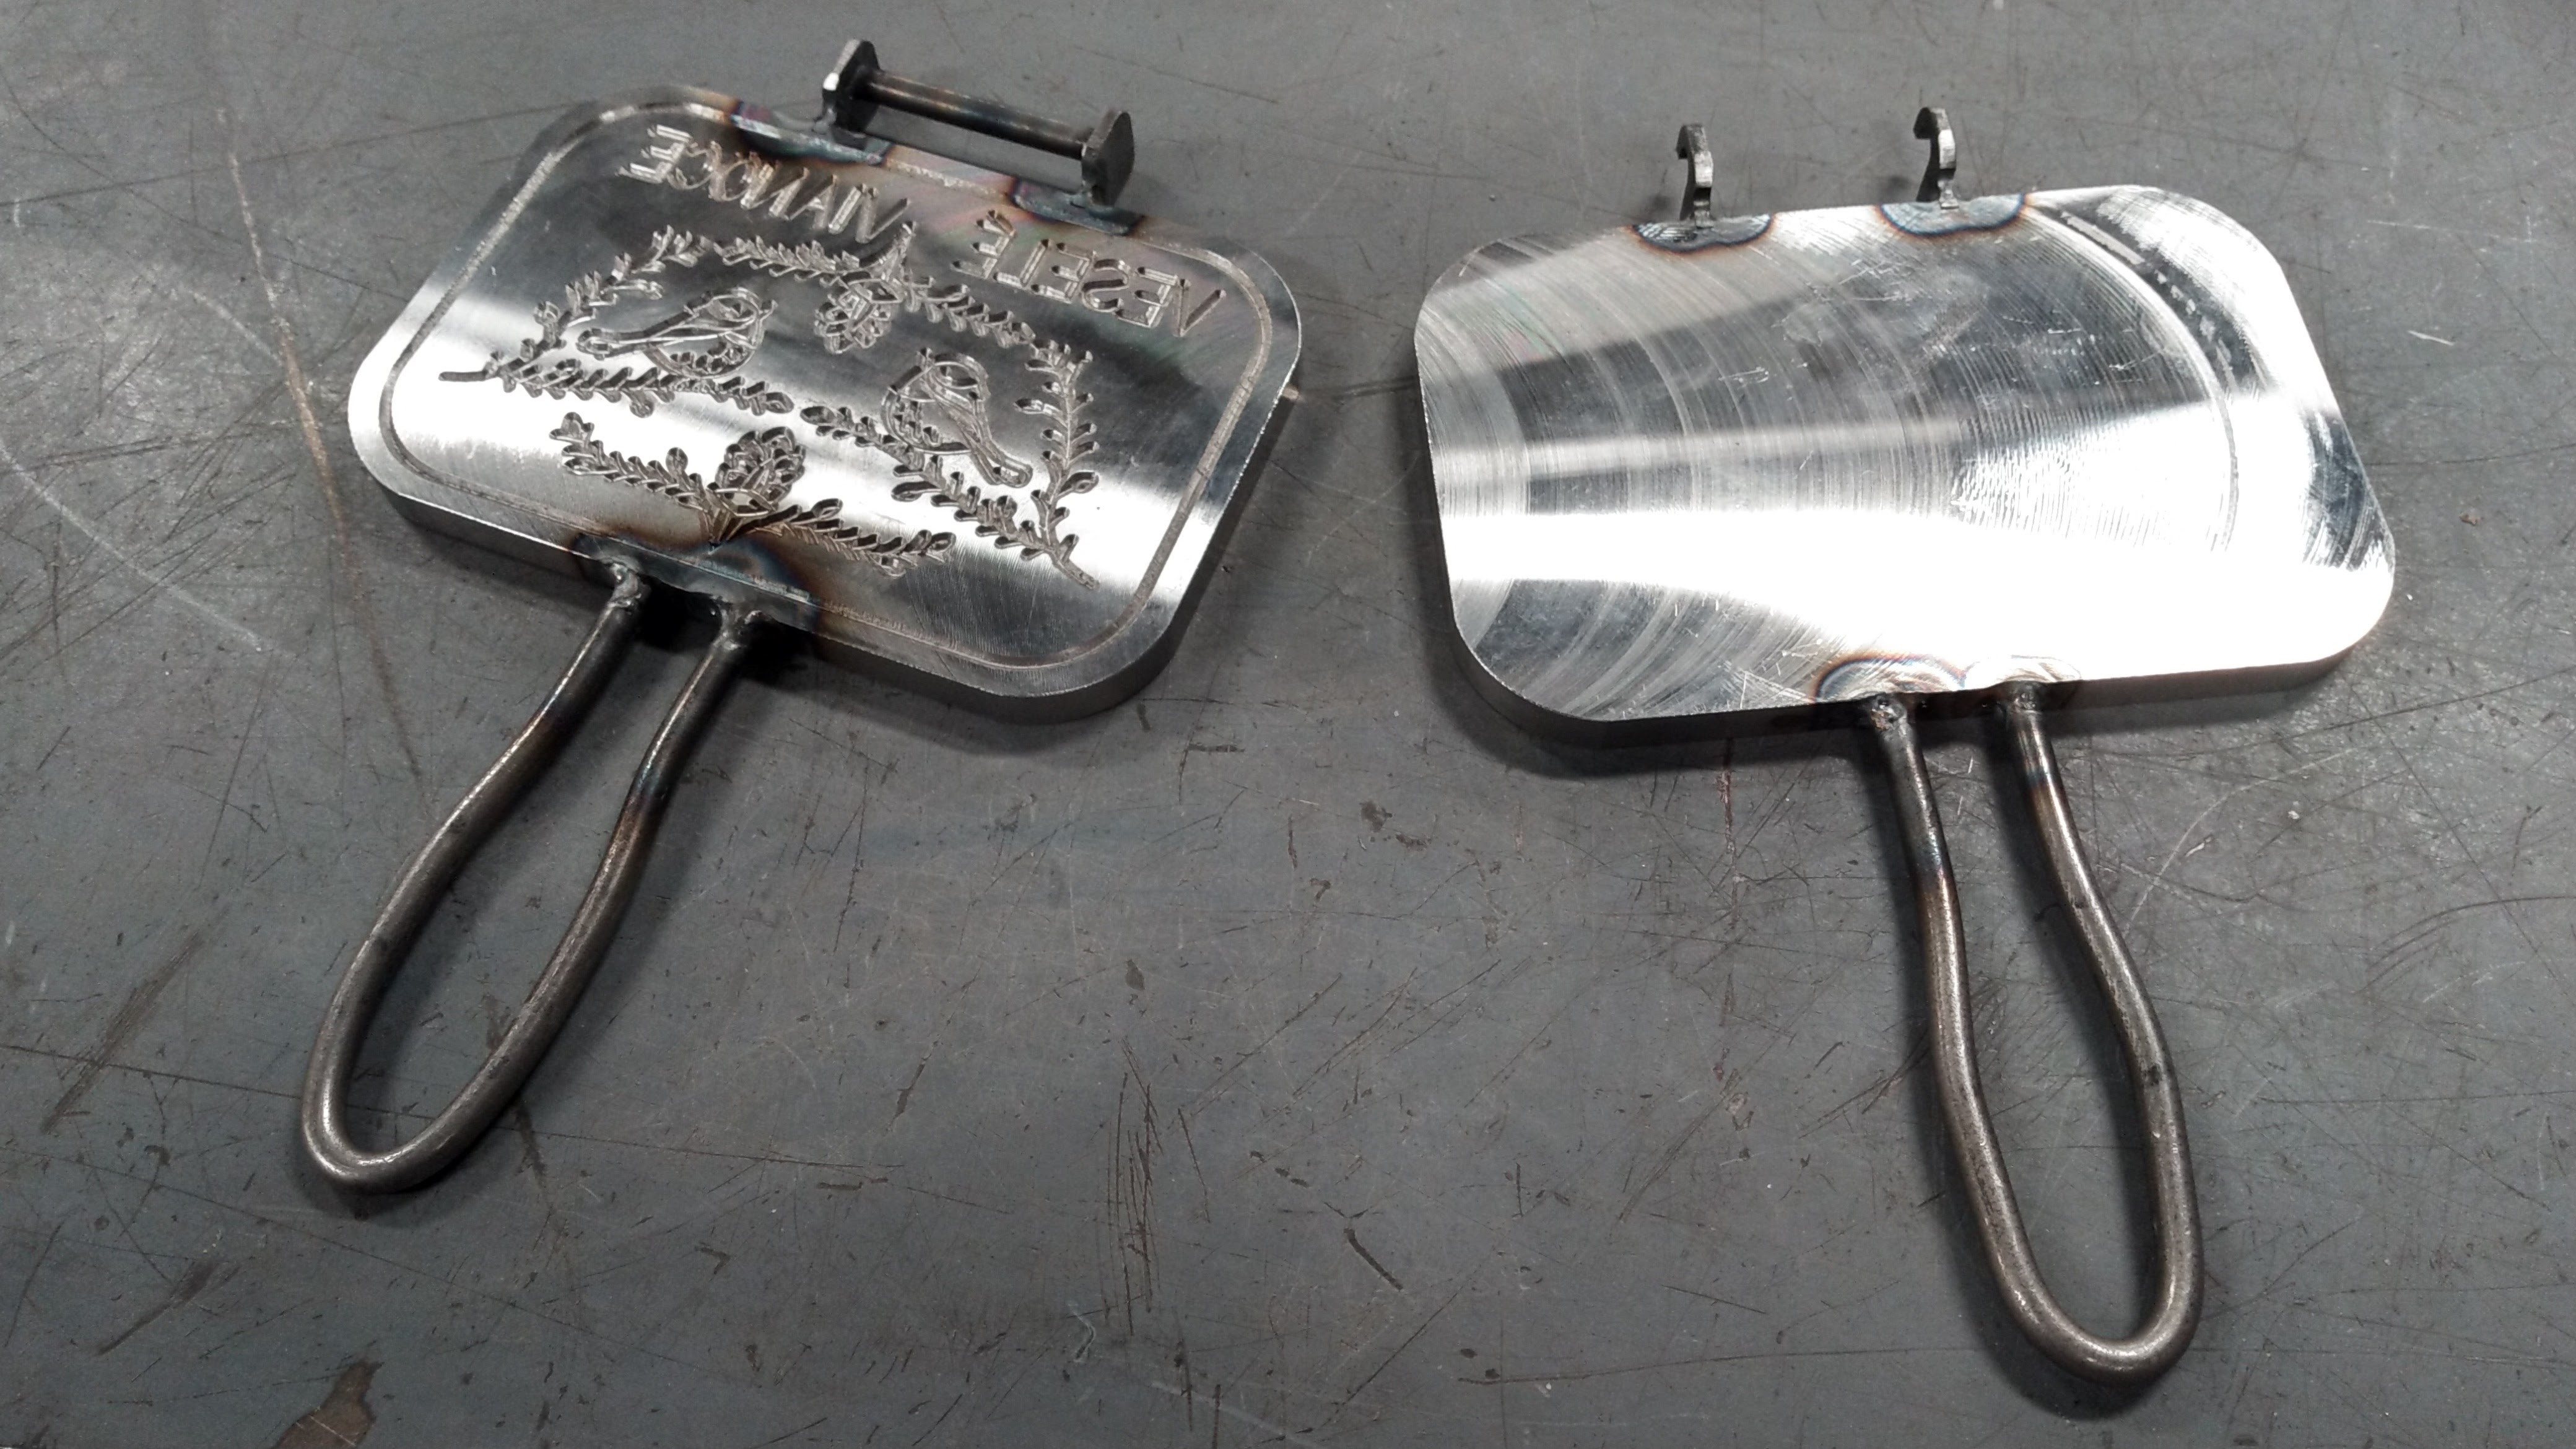 Two sides of a wafer iron with visible heat affected zones from welding